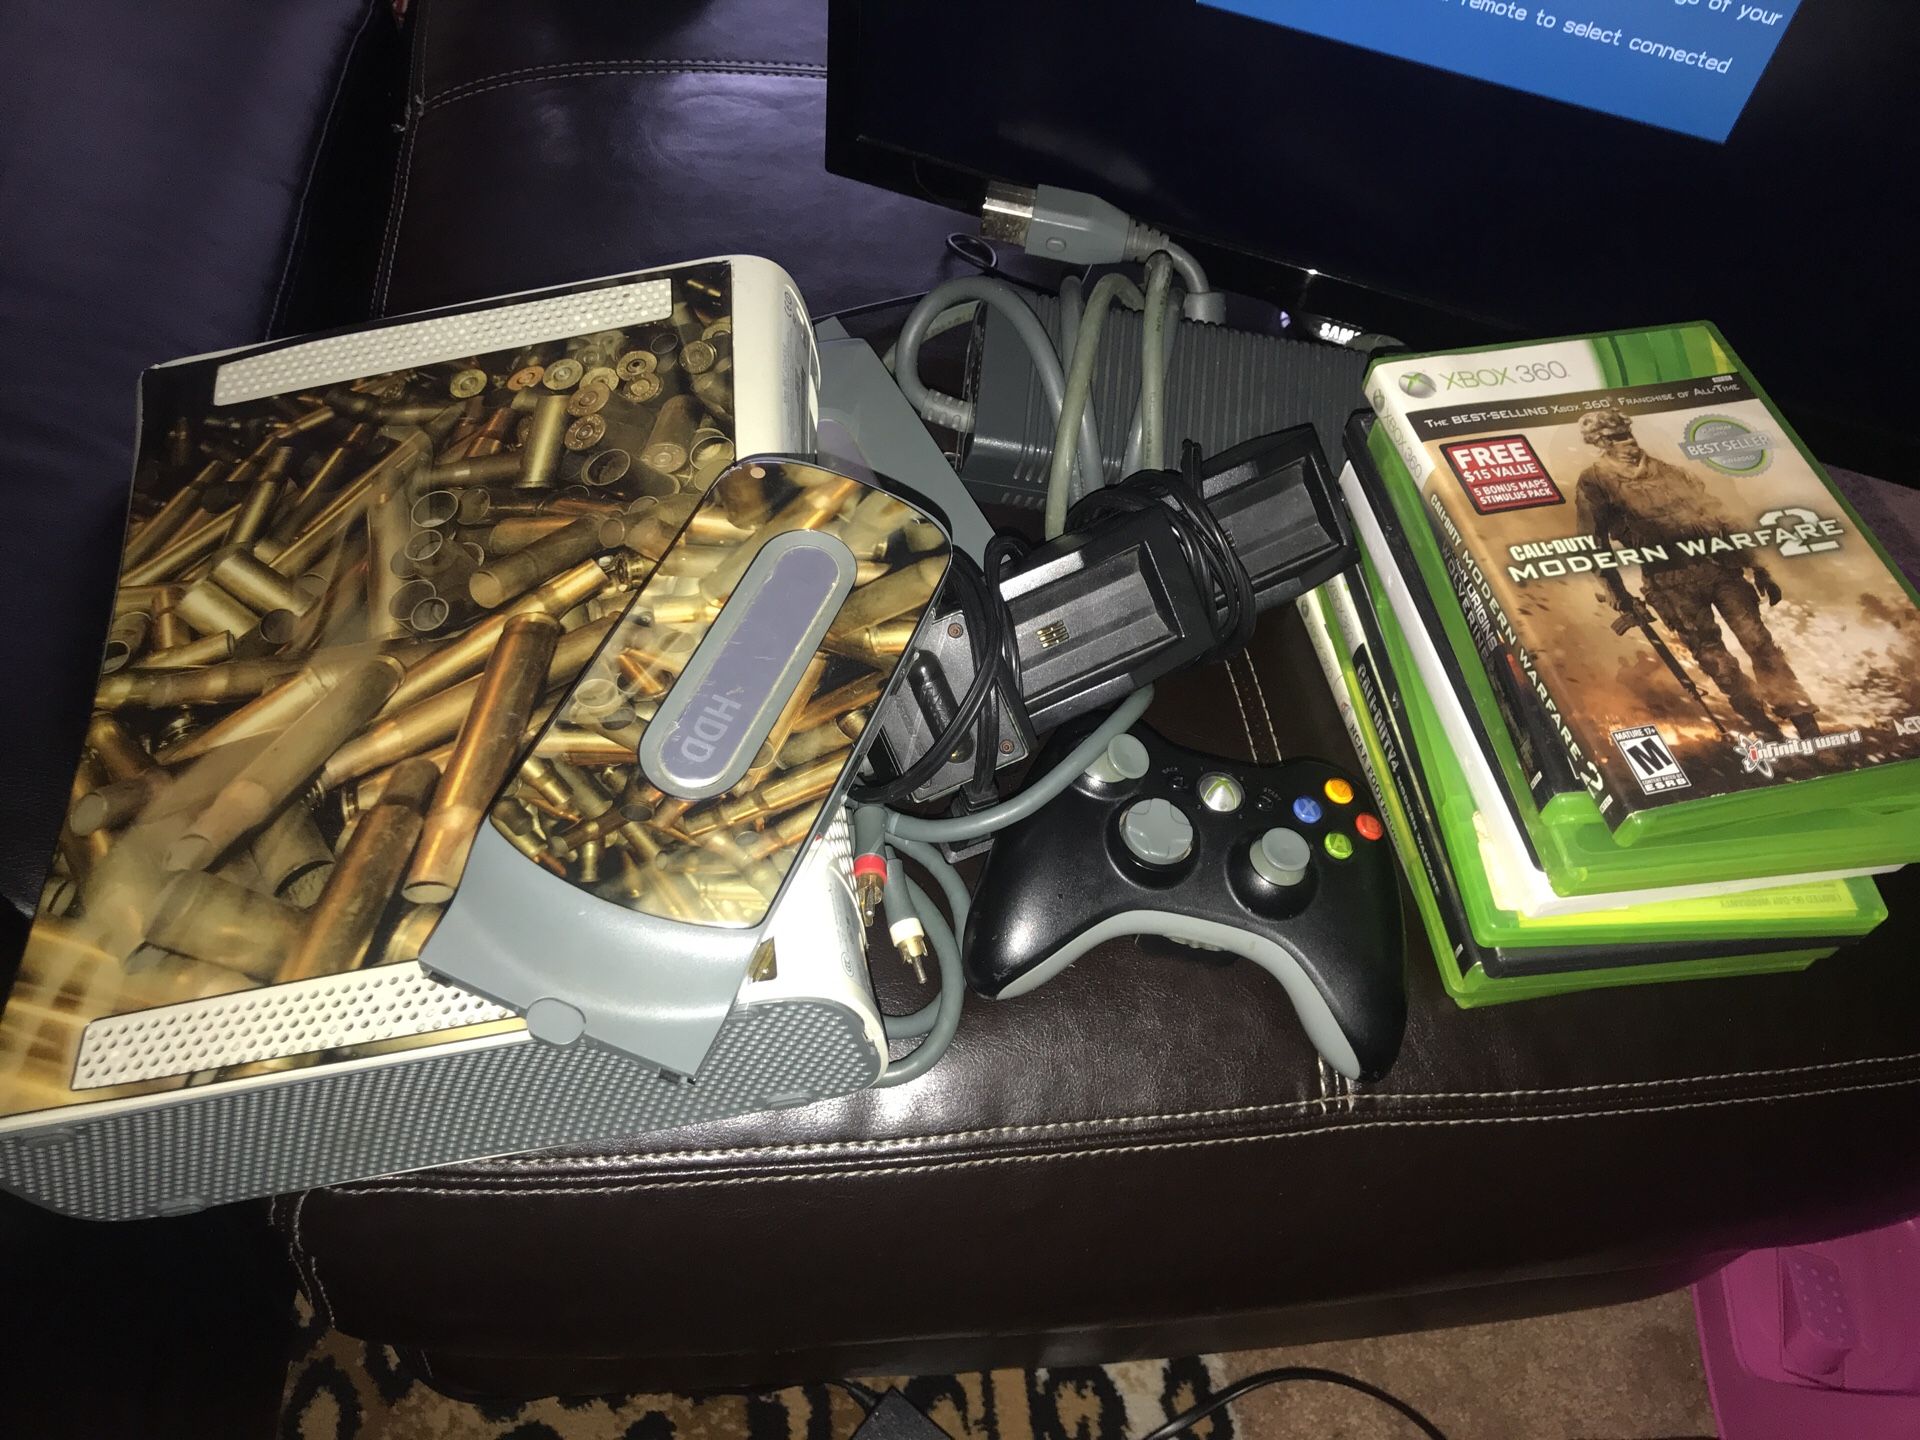 Xbox 360, two hard drives, 12 games, one controller, batteries rechargeable thing